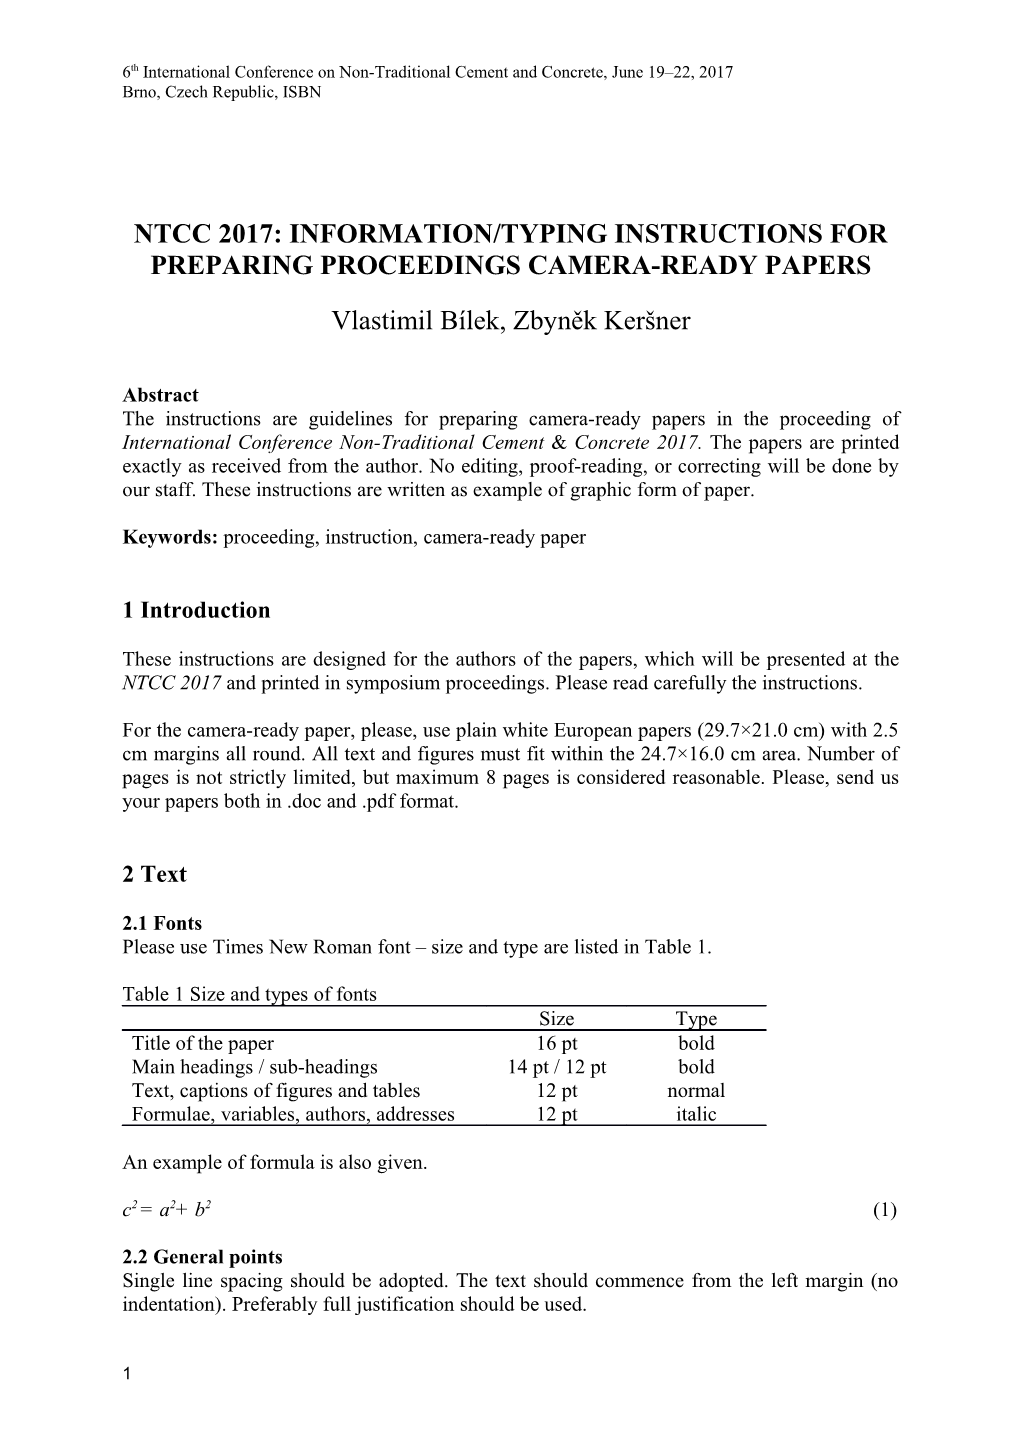 Ntcc 2002: Informa Tion/Typing Instructions for Preparing Camera-Ready Papers